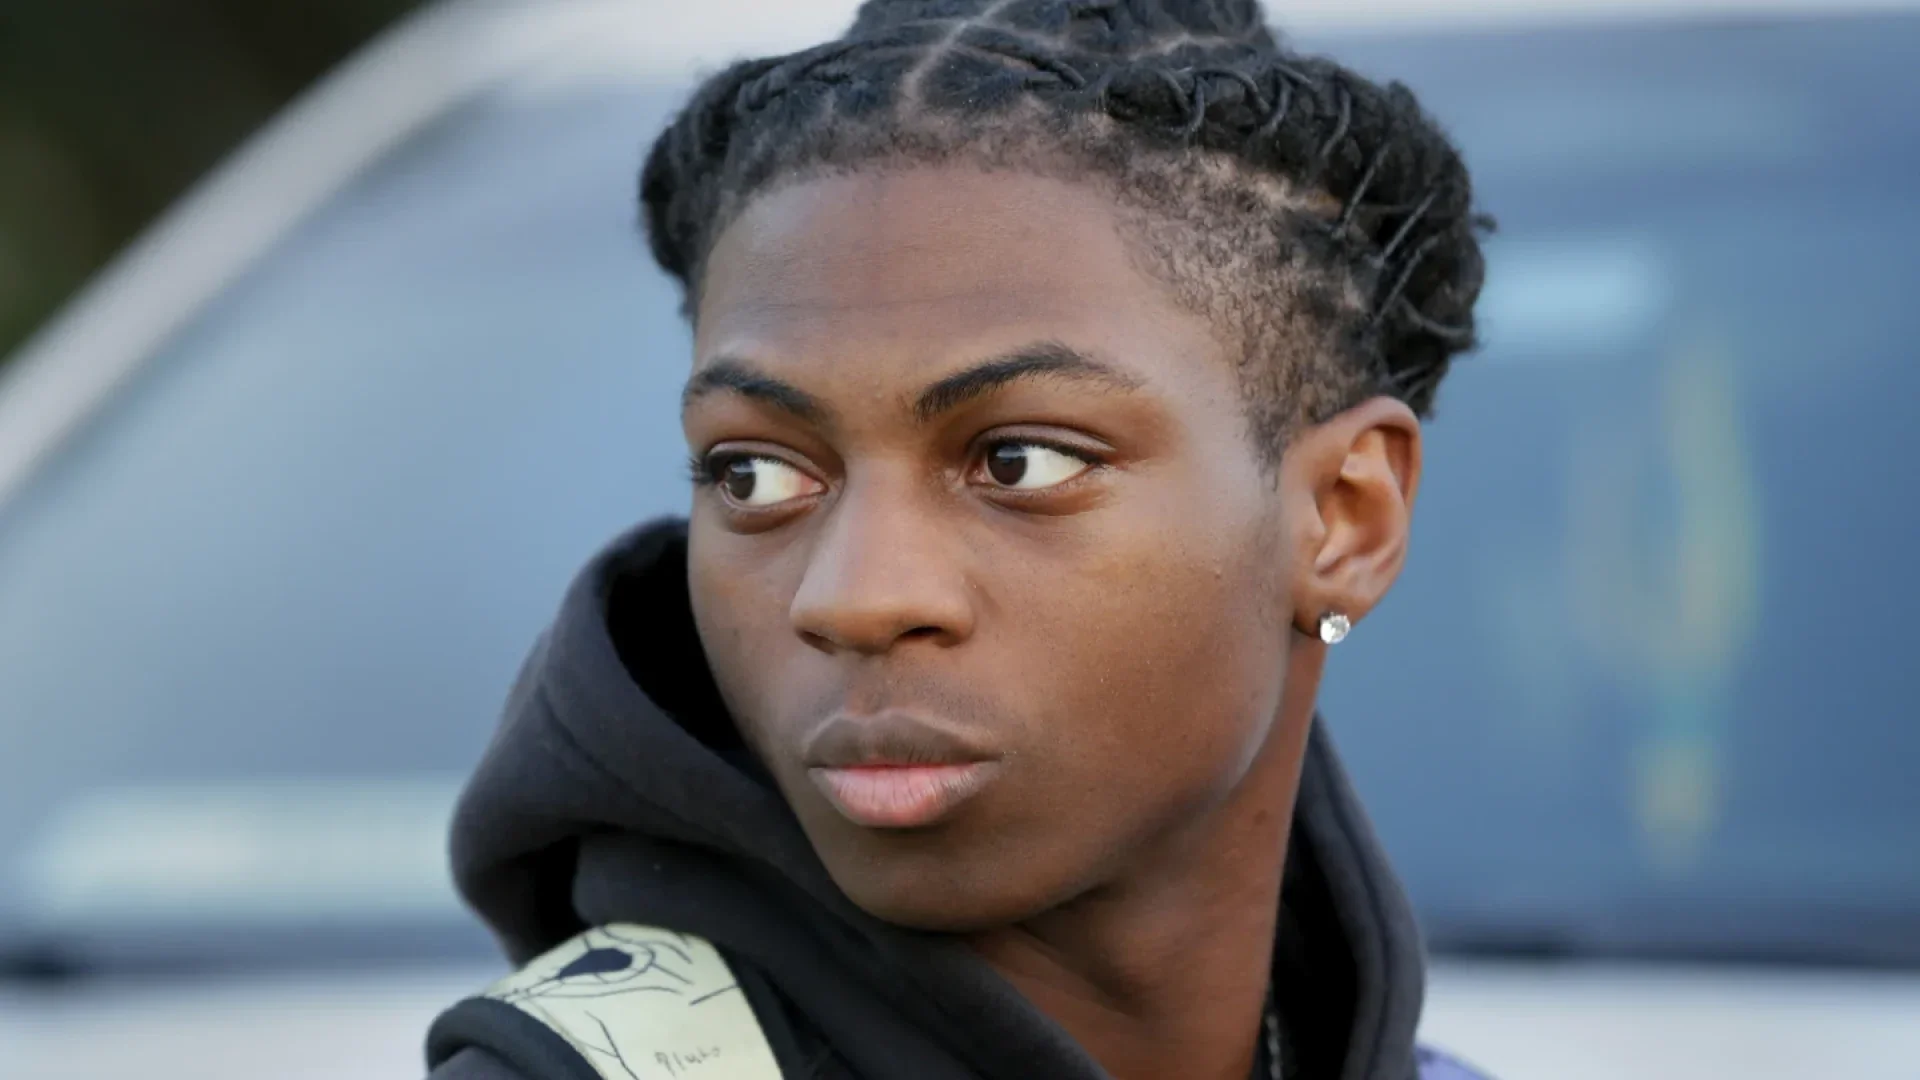 Texas Judge Rules That School Legally Punished Black Student Over His Hairstyle